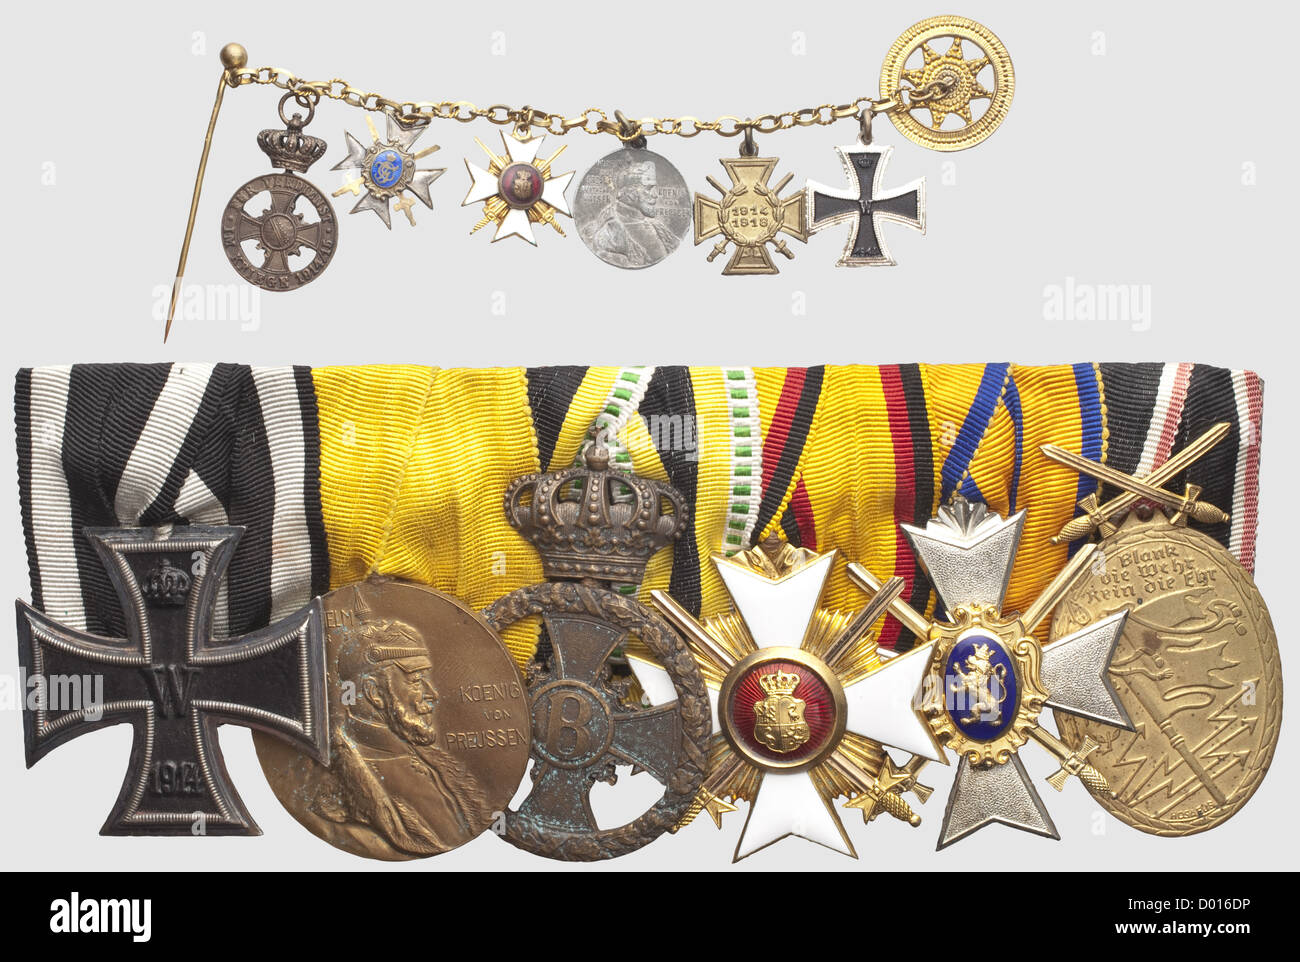 Reuss,a six-piece orders clasp,Iron Cross 2nd Class of 1914,Centenary Medal 1897,Saxony-Meiningen,War Merit Medal(traces of oxidation),Princely Reuss Cross of Honour 2nd Class with Swords,gold(OEK 2001),Princely Schwarzenburg Cross of Honour 3rd Class with Swords(OEK 2785),Kyffhäuser Medal. Included is a corresponding miniatures chain with the Cross of Honour for Front Fighters instead of the Kyffhäuser Medal,historic,historical,1910s,20th century,19th century,medal,decoration,medals,decorations,badge of honour,badge of honor,badges of h,Additional-Rights-Clearences-Not Available Stock Photo